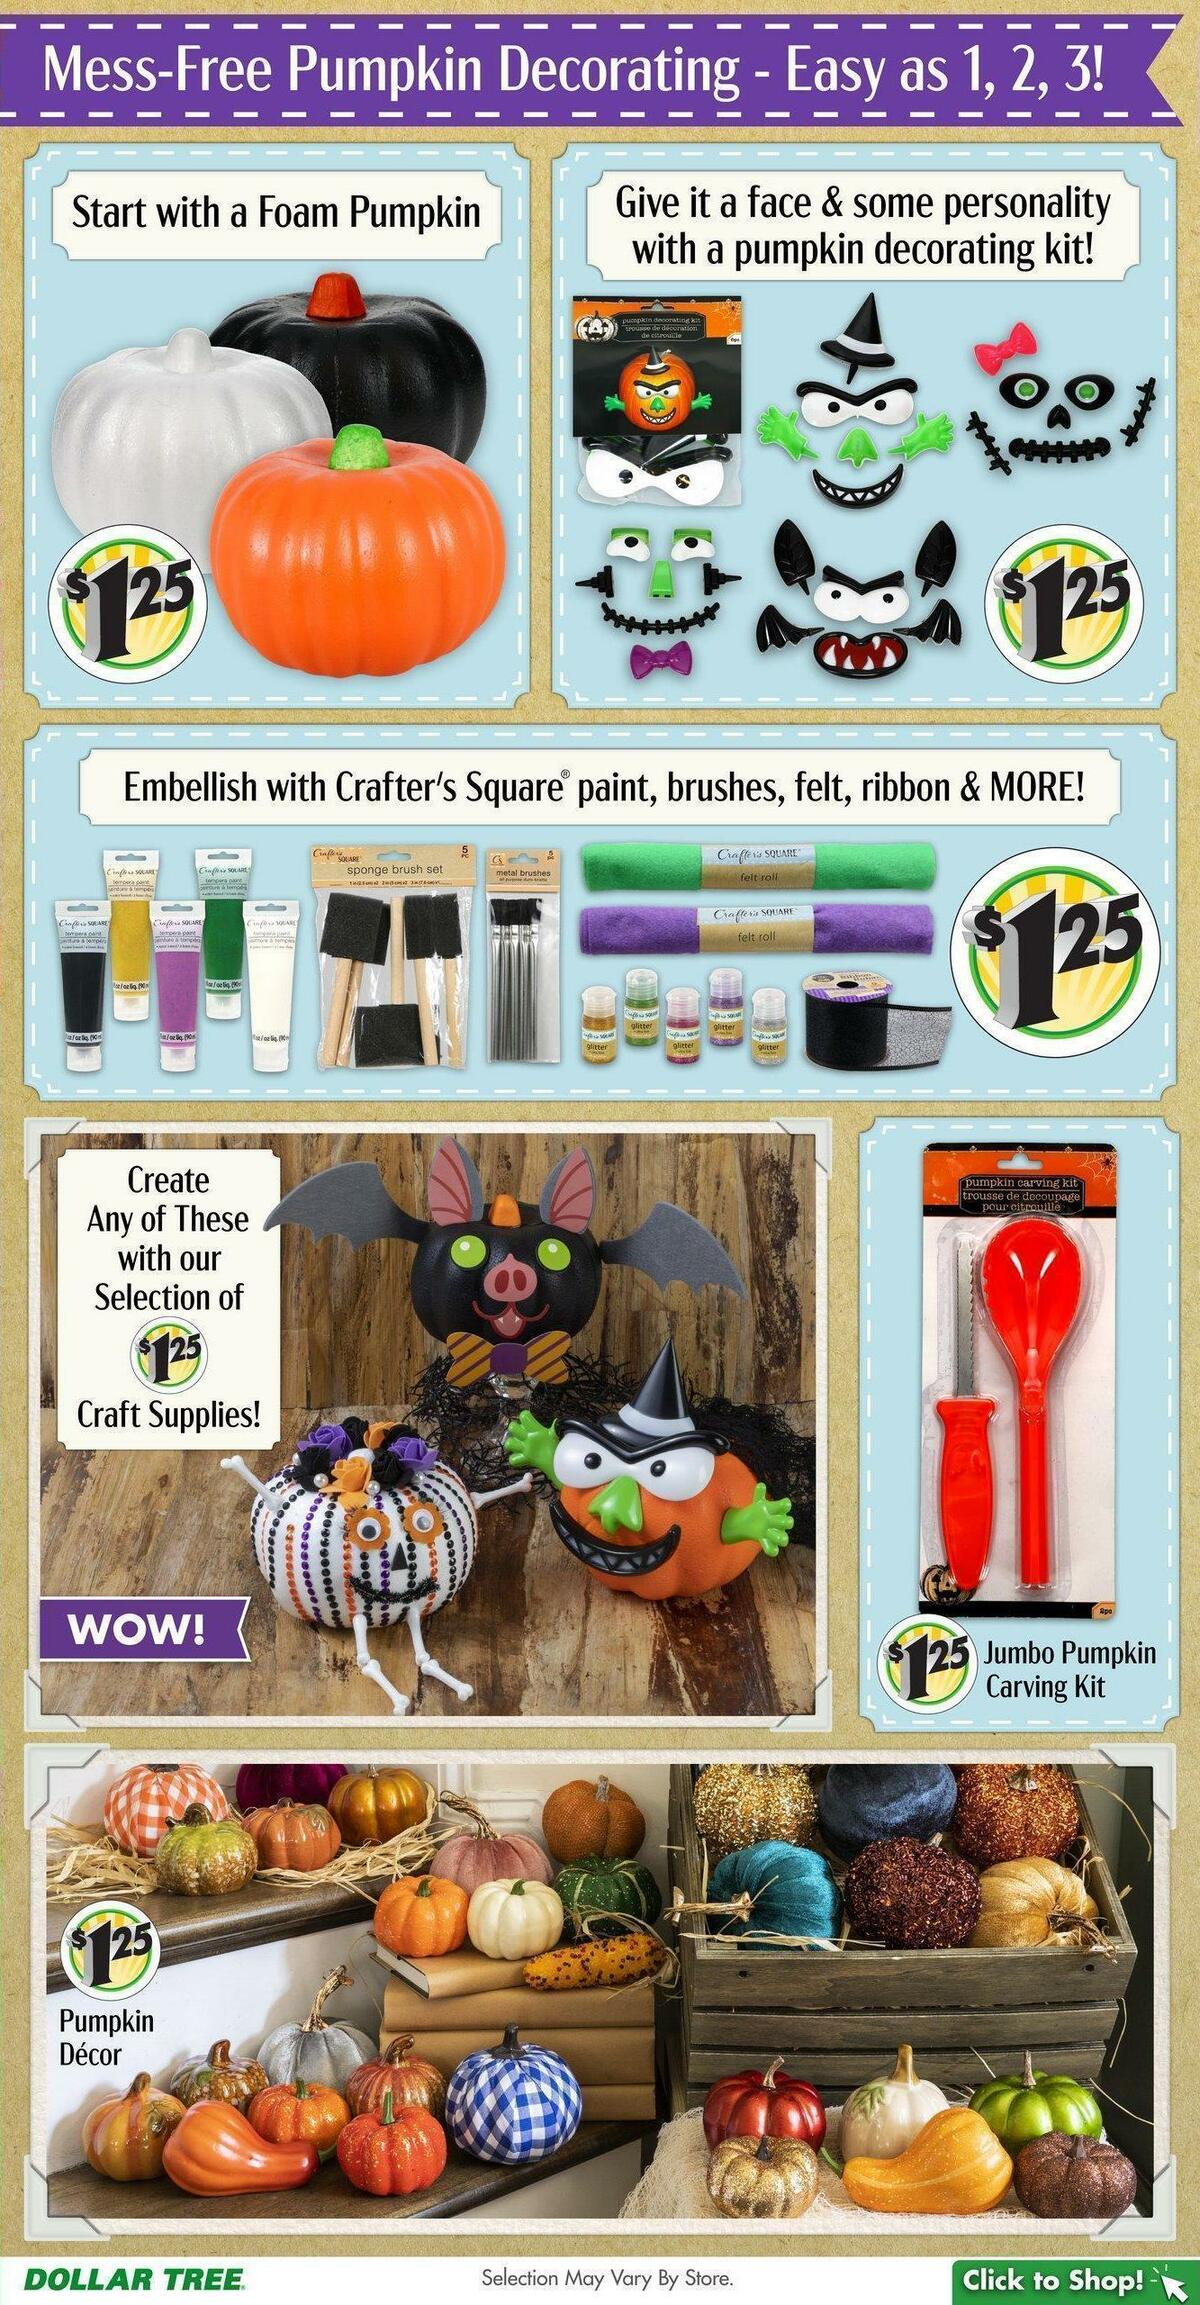 Dollar Tree Weekly Ad from September 11